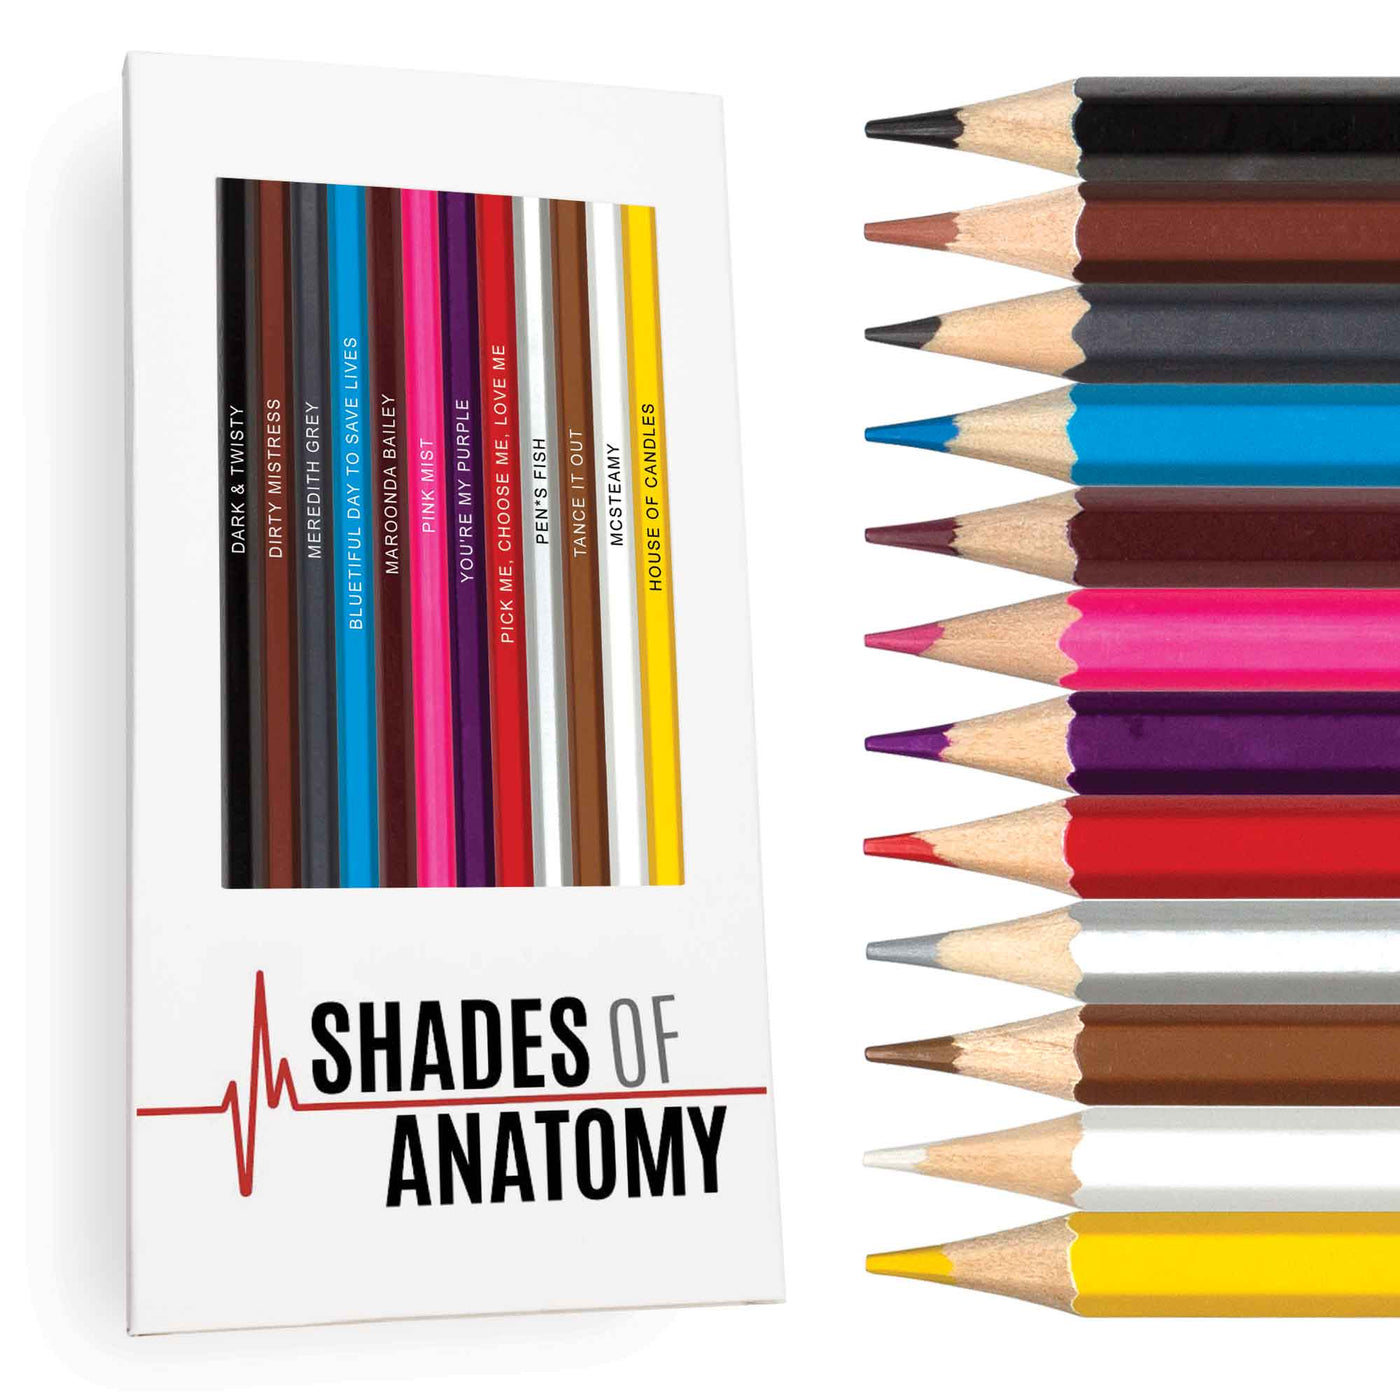 Shades of Anatomy Colored Pencils for Fans of Grey's Anatomy Box and Pencils